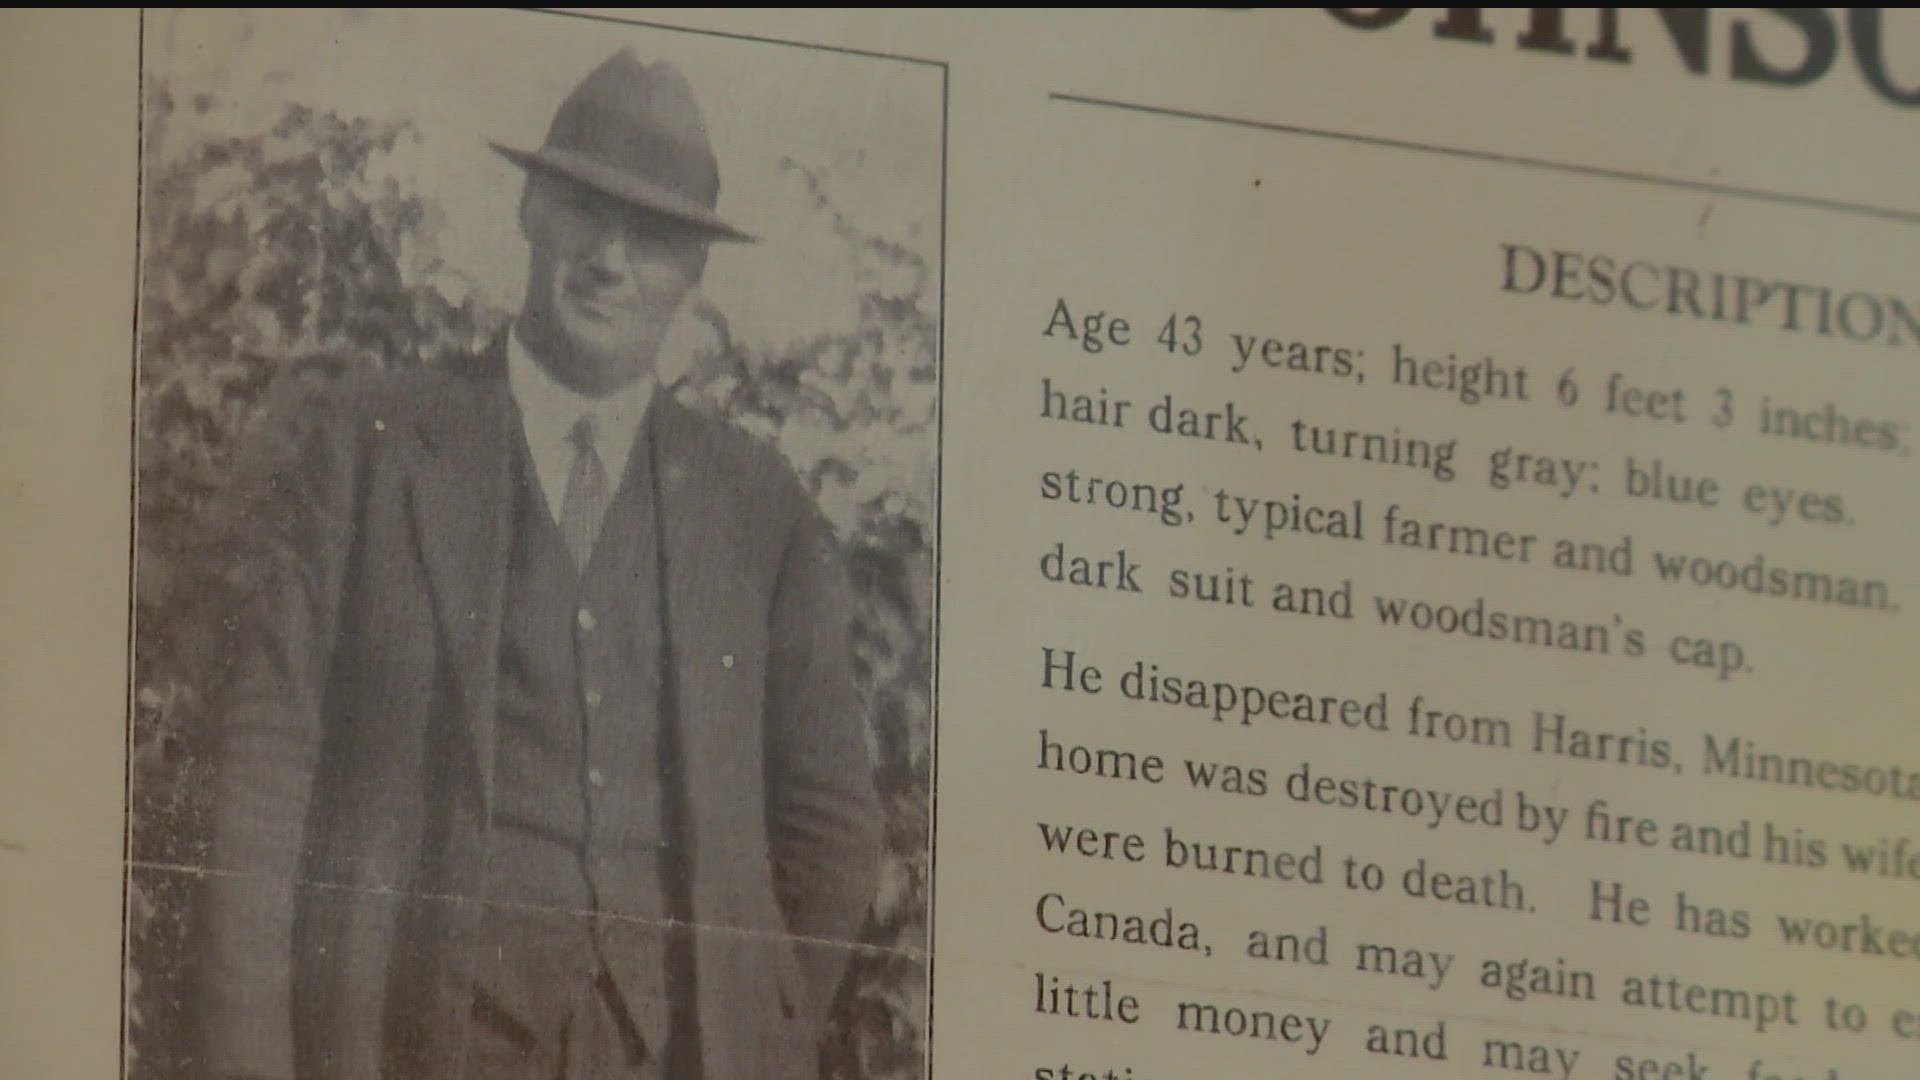 The Johnson family's remains were all found in a burned-down farmhouse in 1933, except for Albin Johnson, who was never seen again.